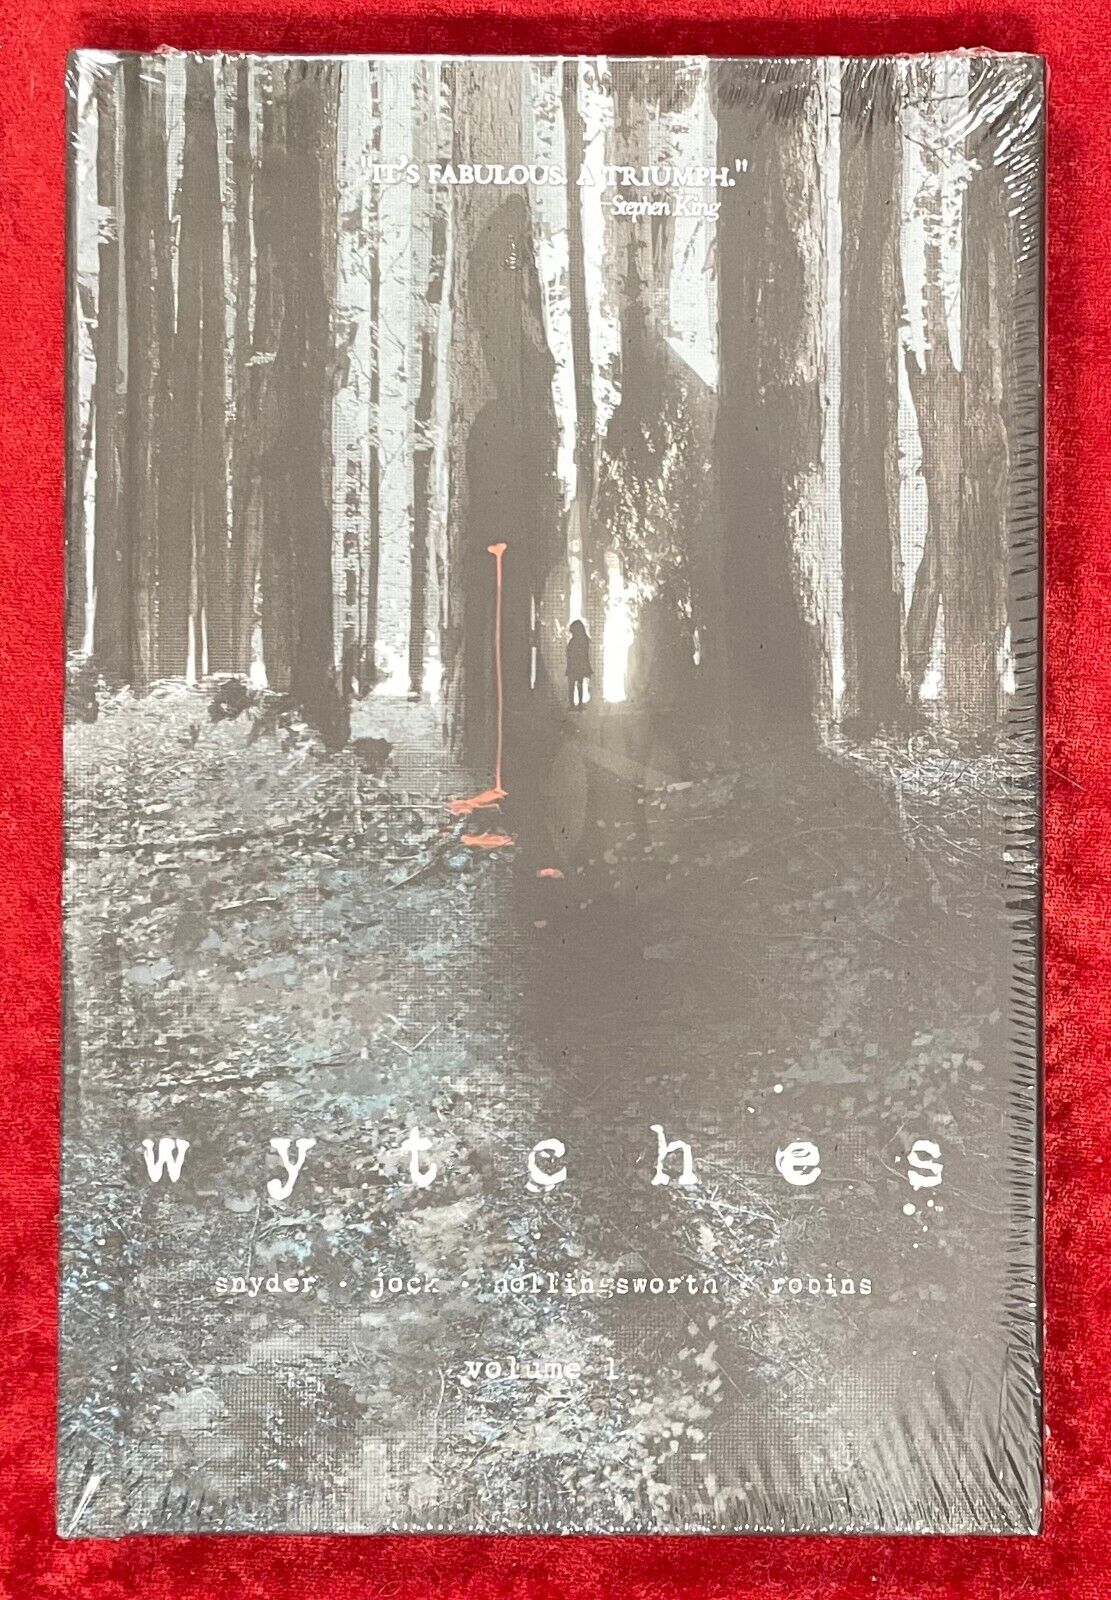 Wytches Volume 1 Convention Exclusive Hardcover, Image; Amazon animation soon